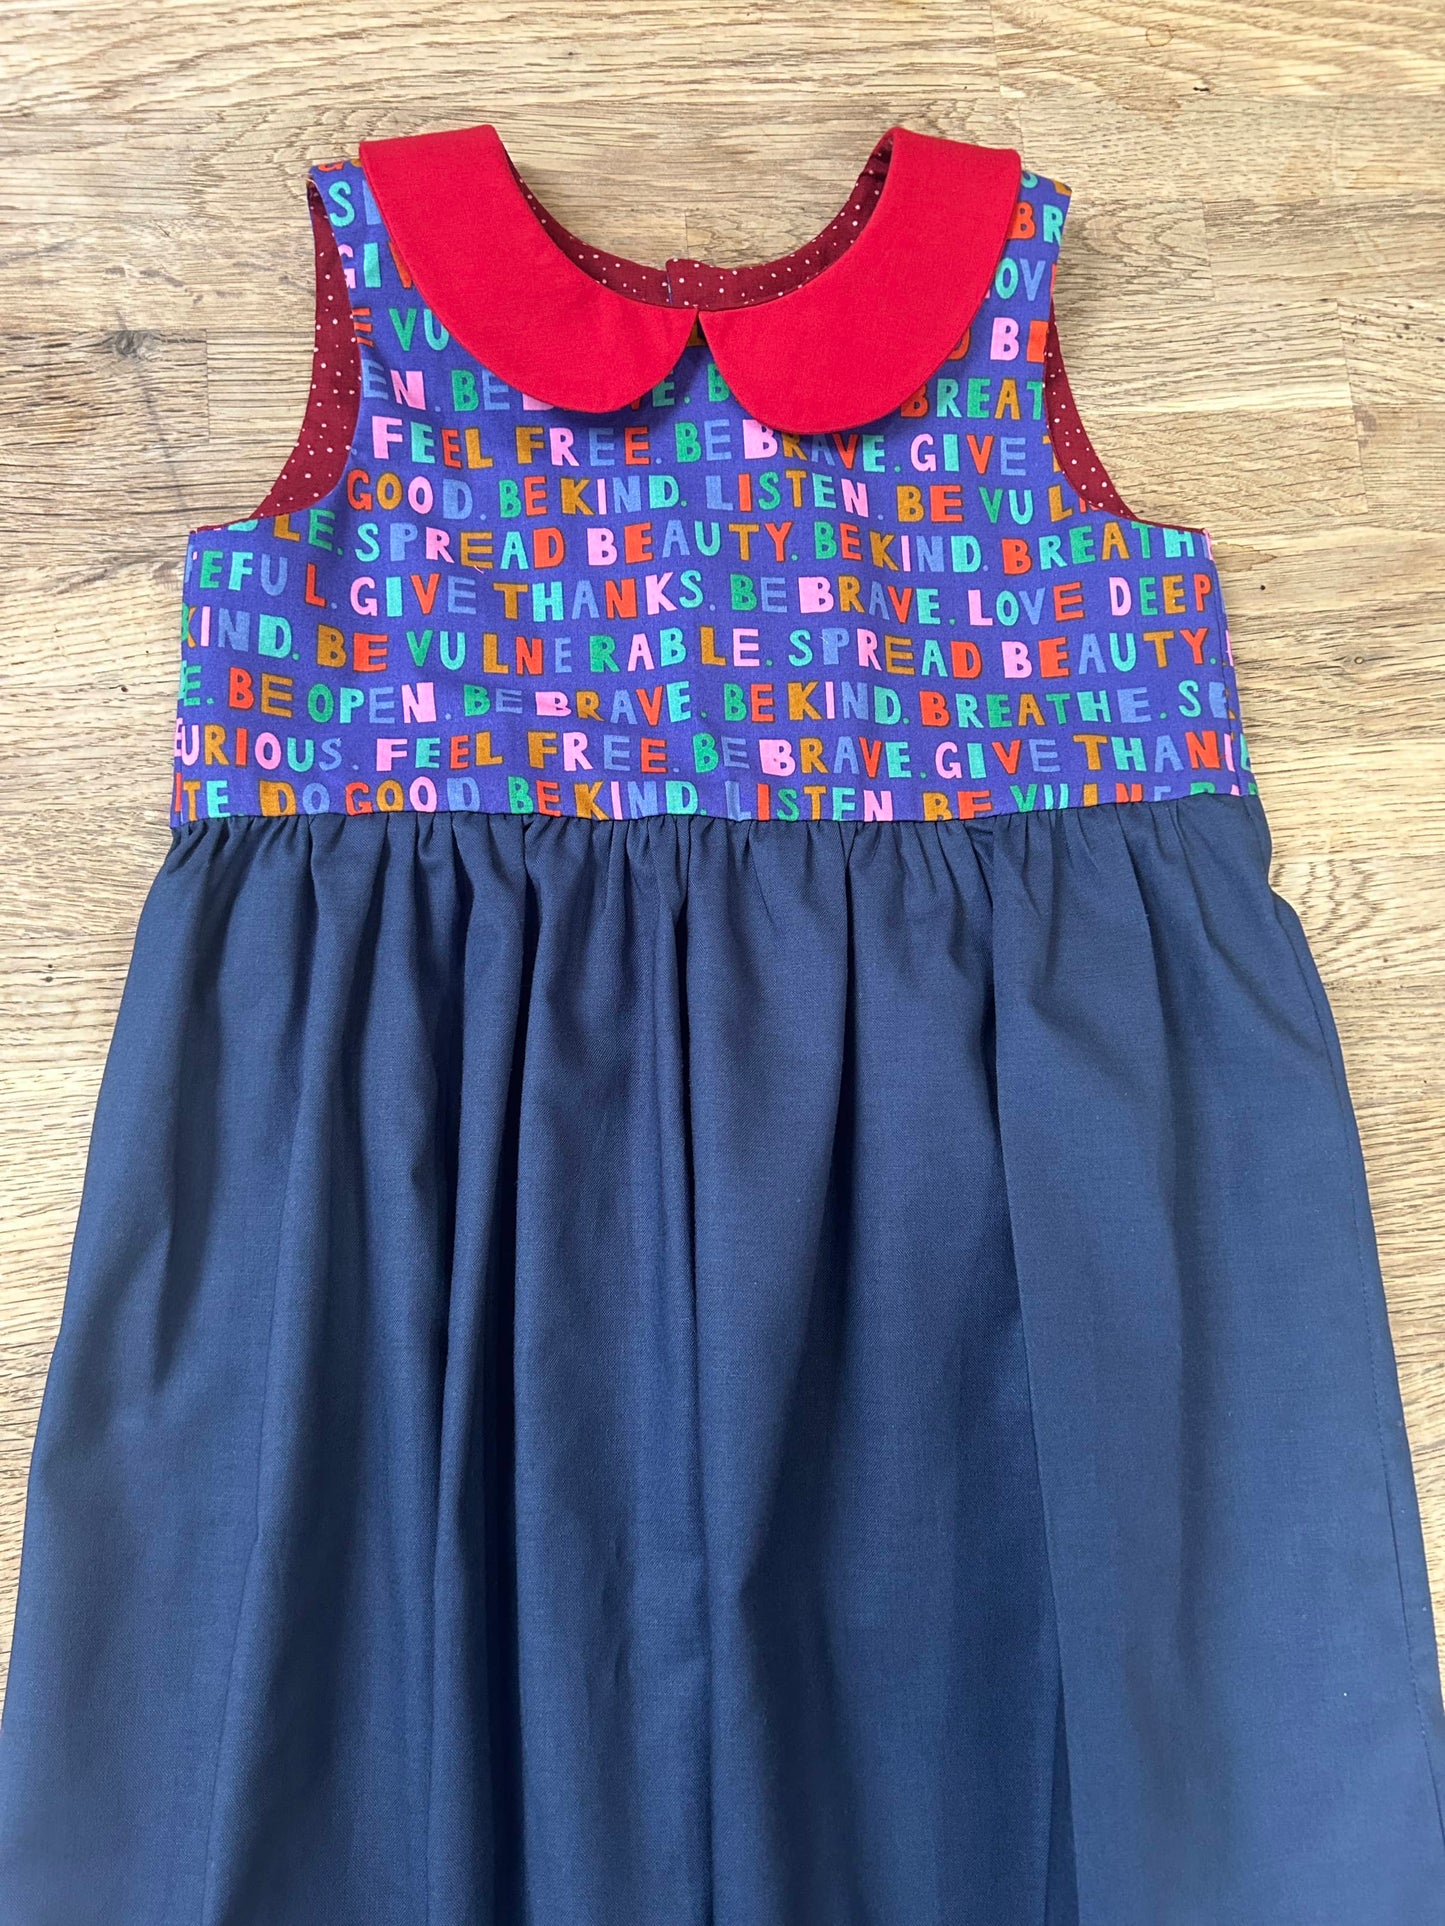 Be Kind. Be Brave. Give Thanks - Blue Dress with Red Peter Pan Collar